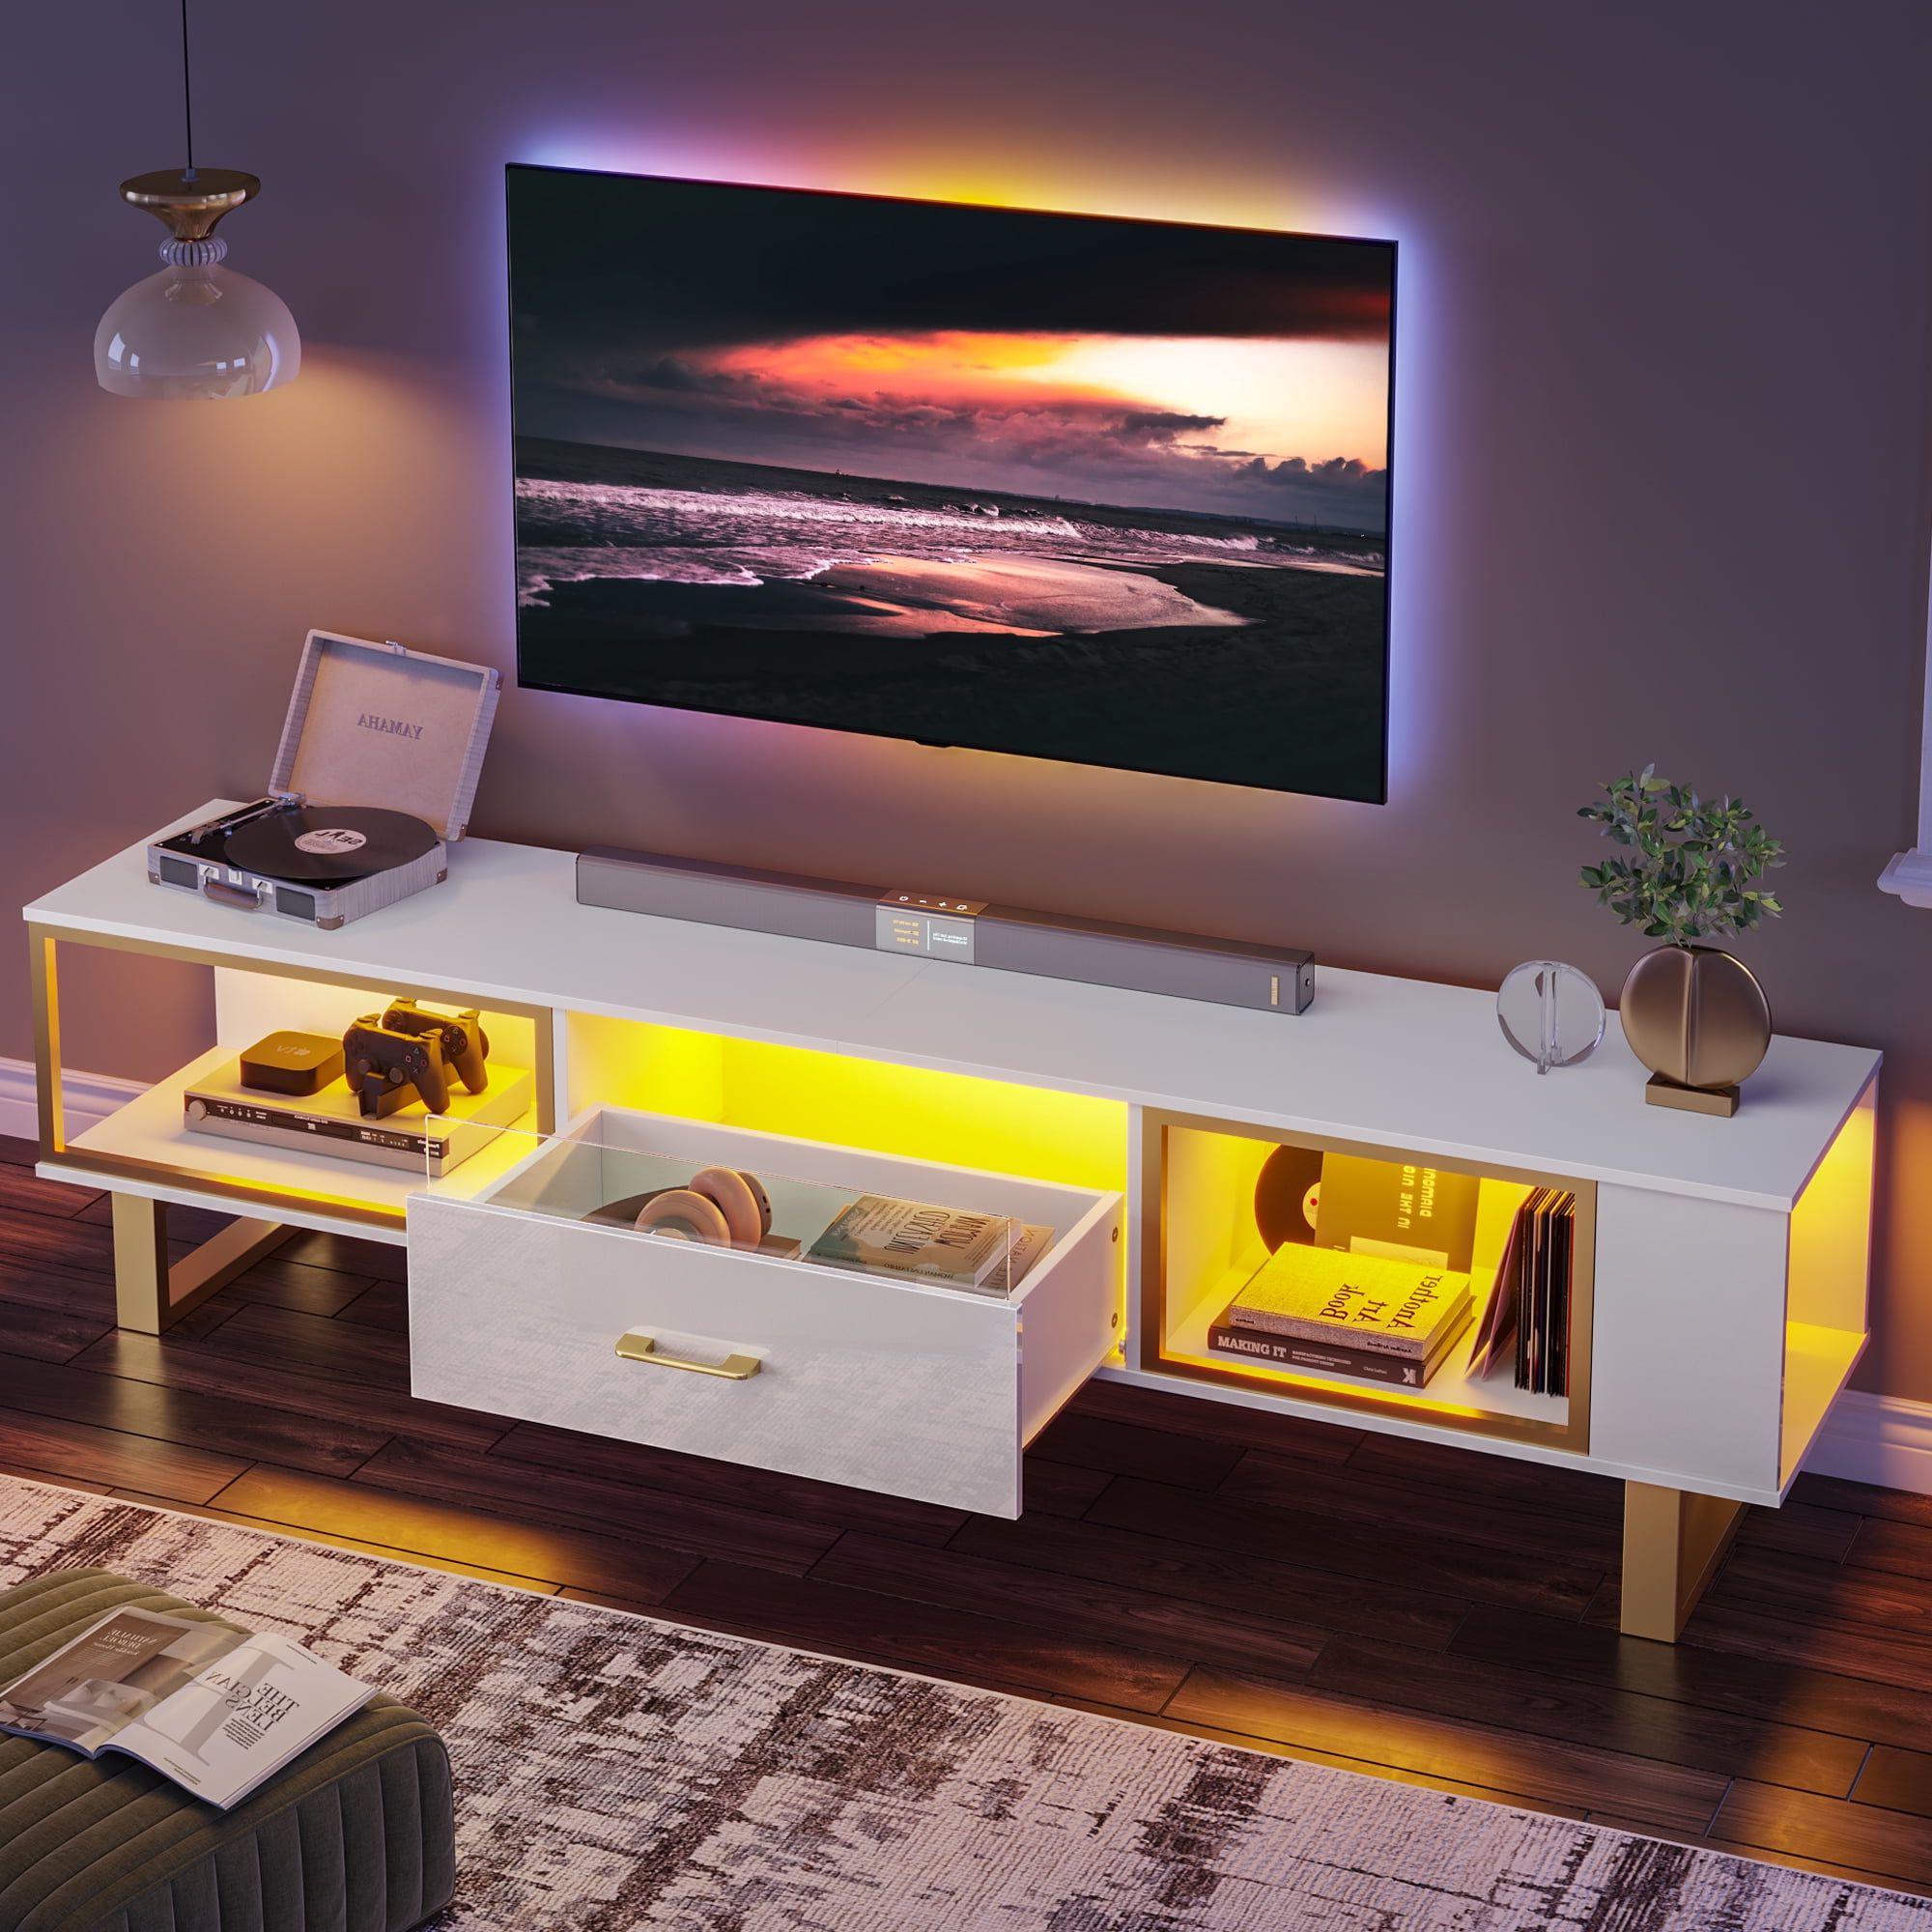 Bestier Tv Stand For Tvs Up To 75" Regarding Latest Bestier 70" Tv Stand For Tvs Up To 75 Inch High Gloss Modern Led (View 12 of 15)